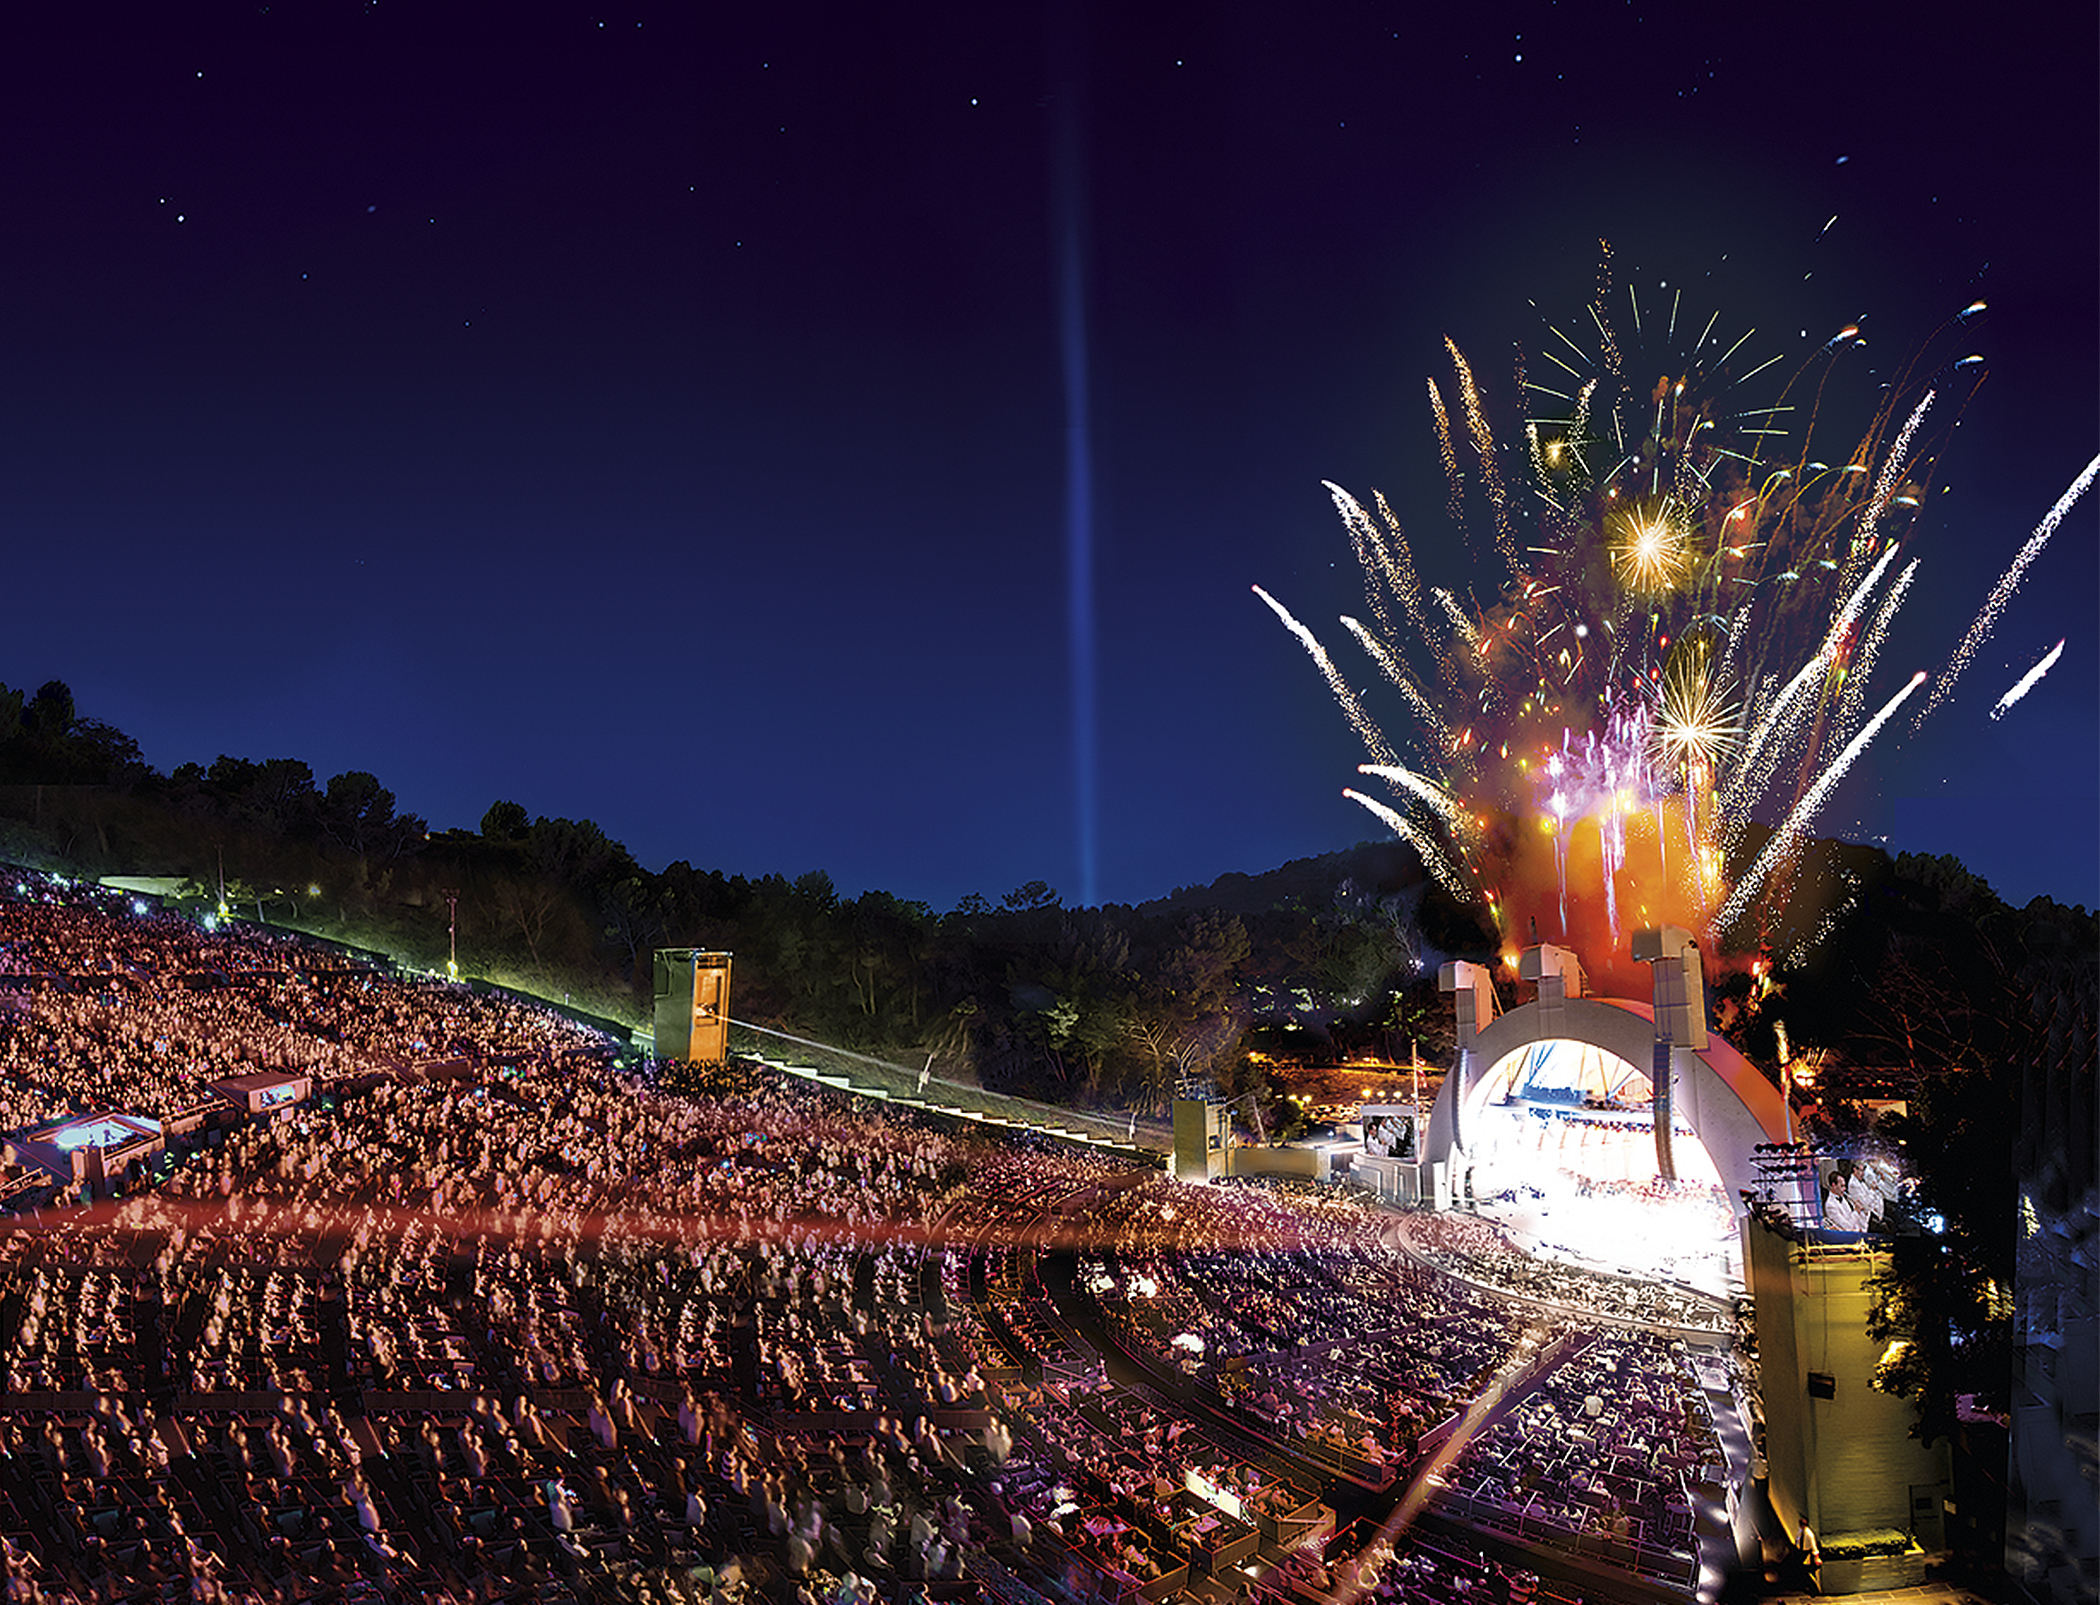 The Hollywood Bowl with fireworks and a full house.